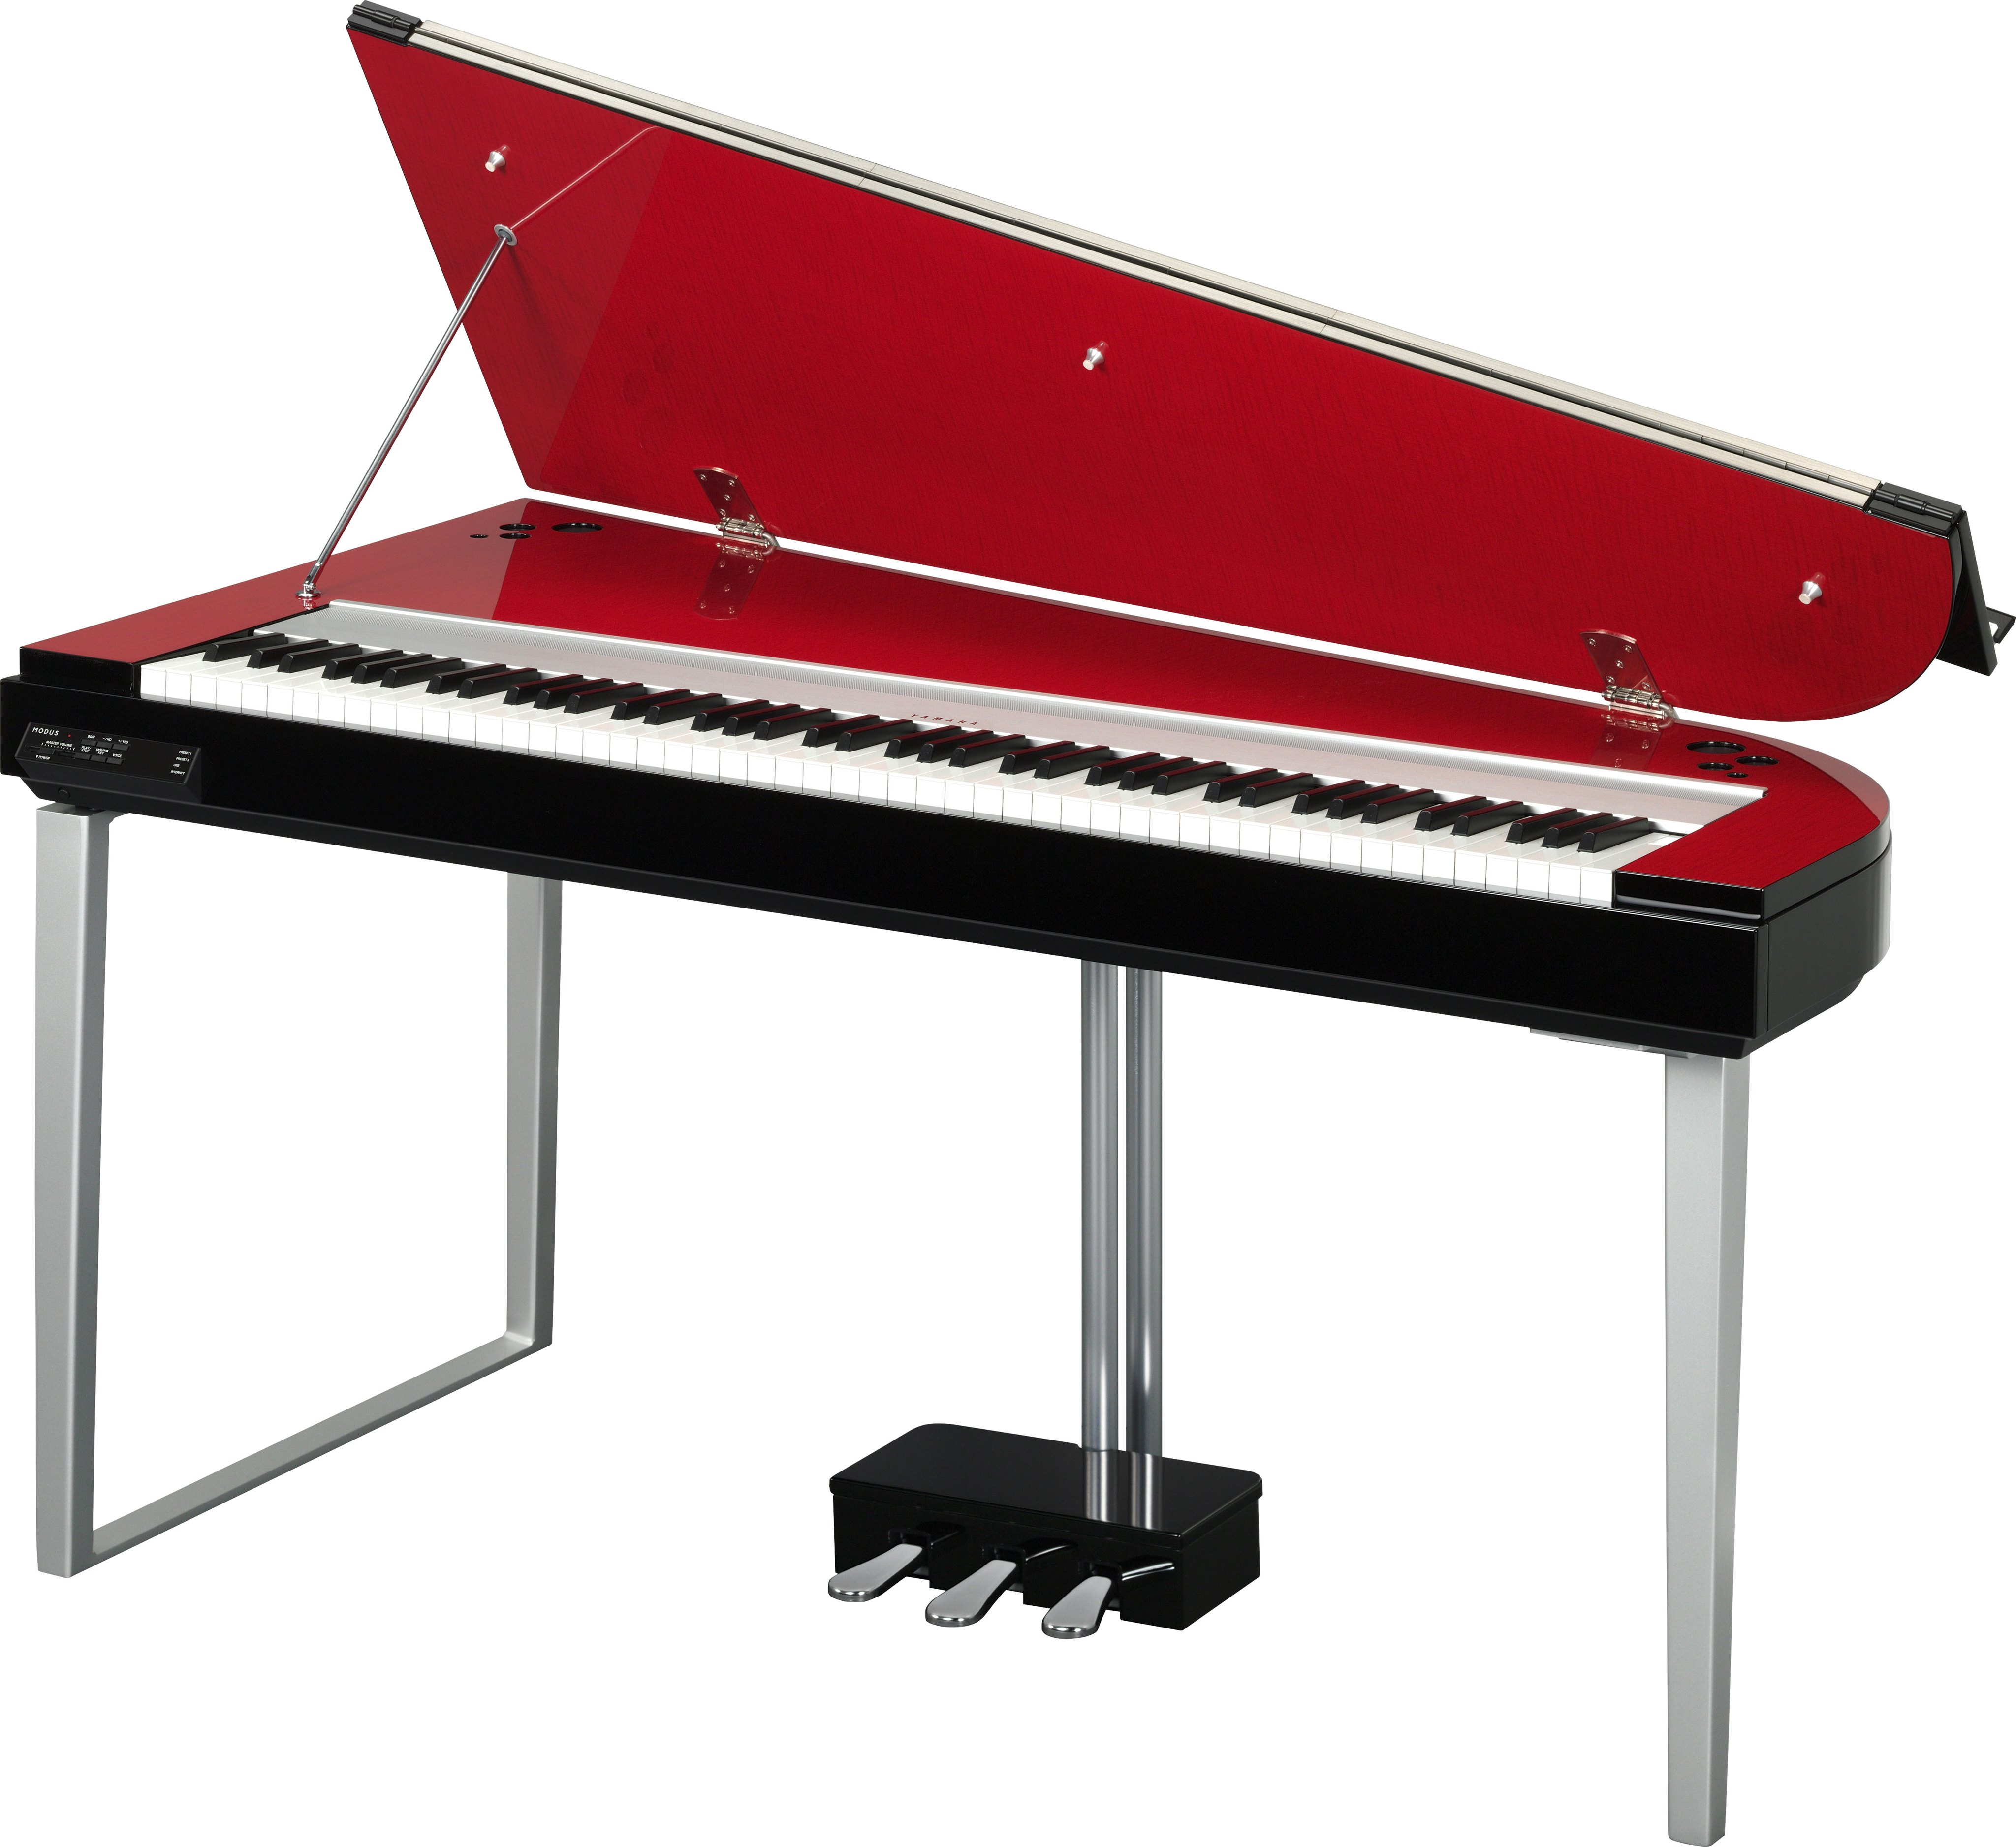 H11 - Overview - - Pianos - Musical Instruments - Products - Yamaha - Other